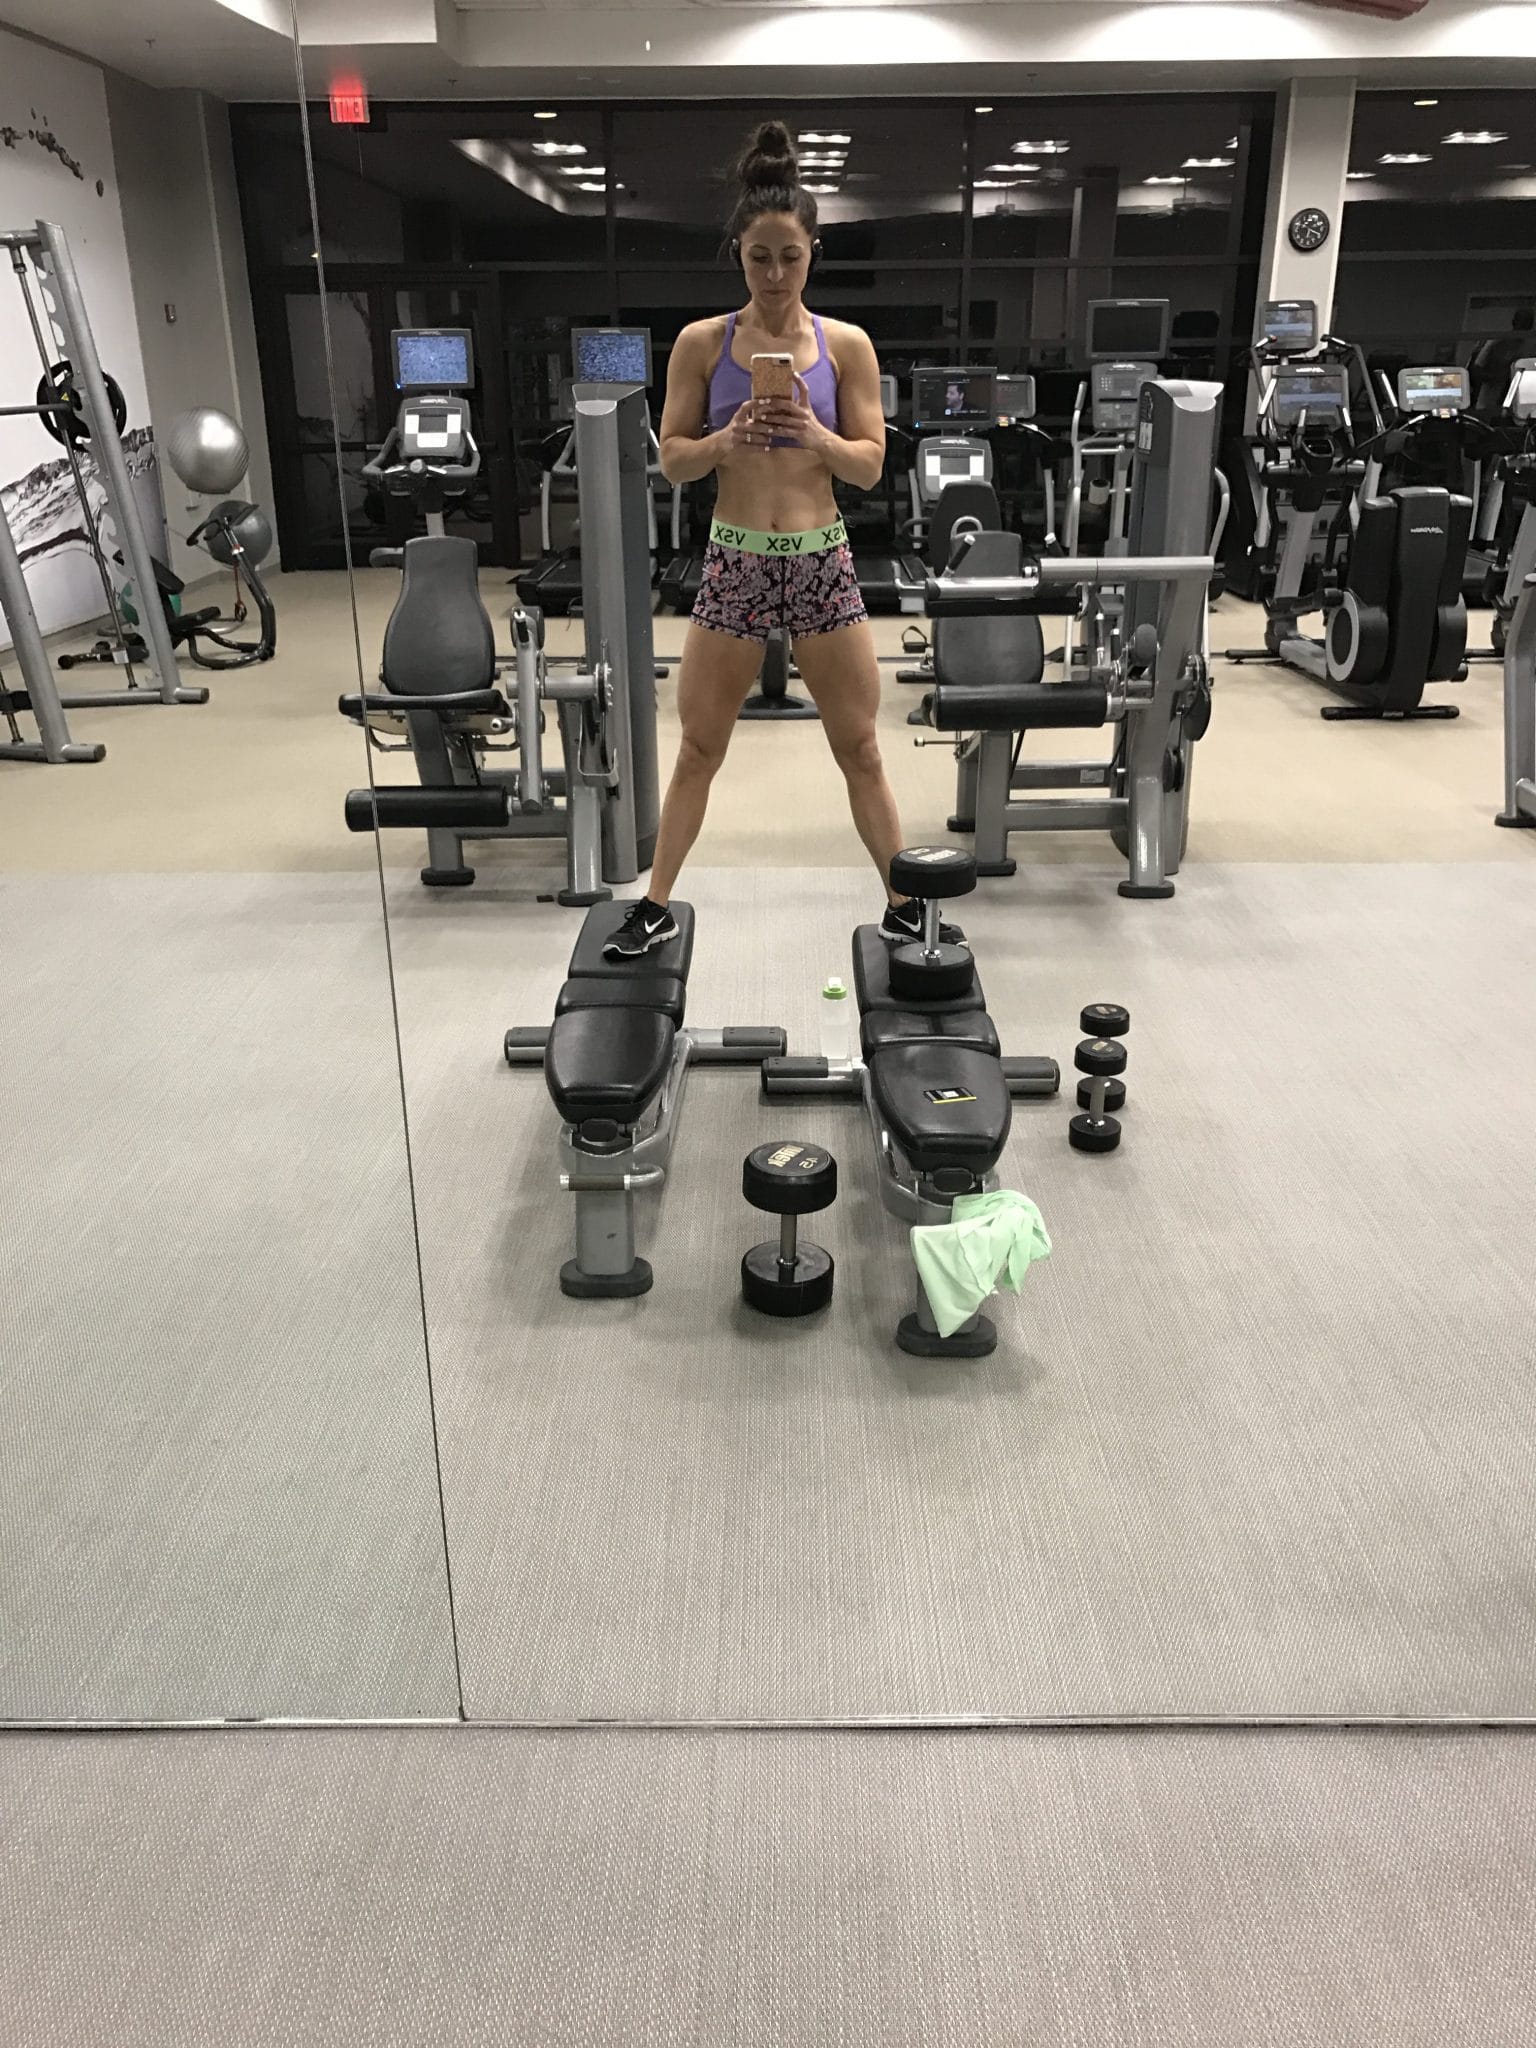 gym - Our Stay at Orlando World Center Marriott by popular New Jersey travel blogger Fit Mommy in Heels